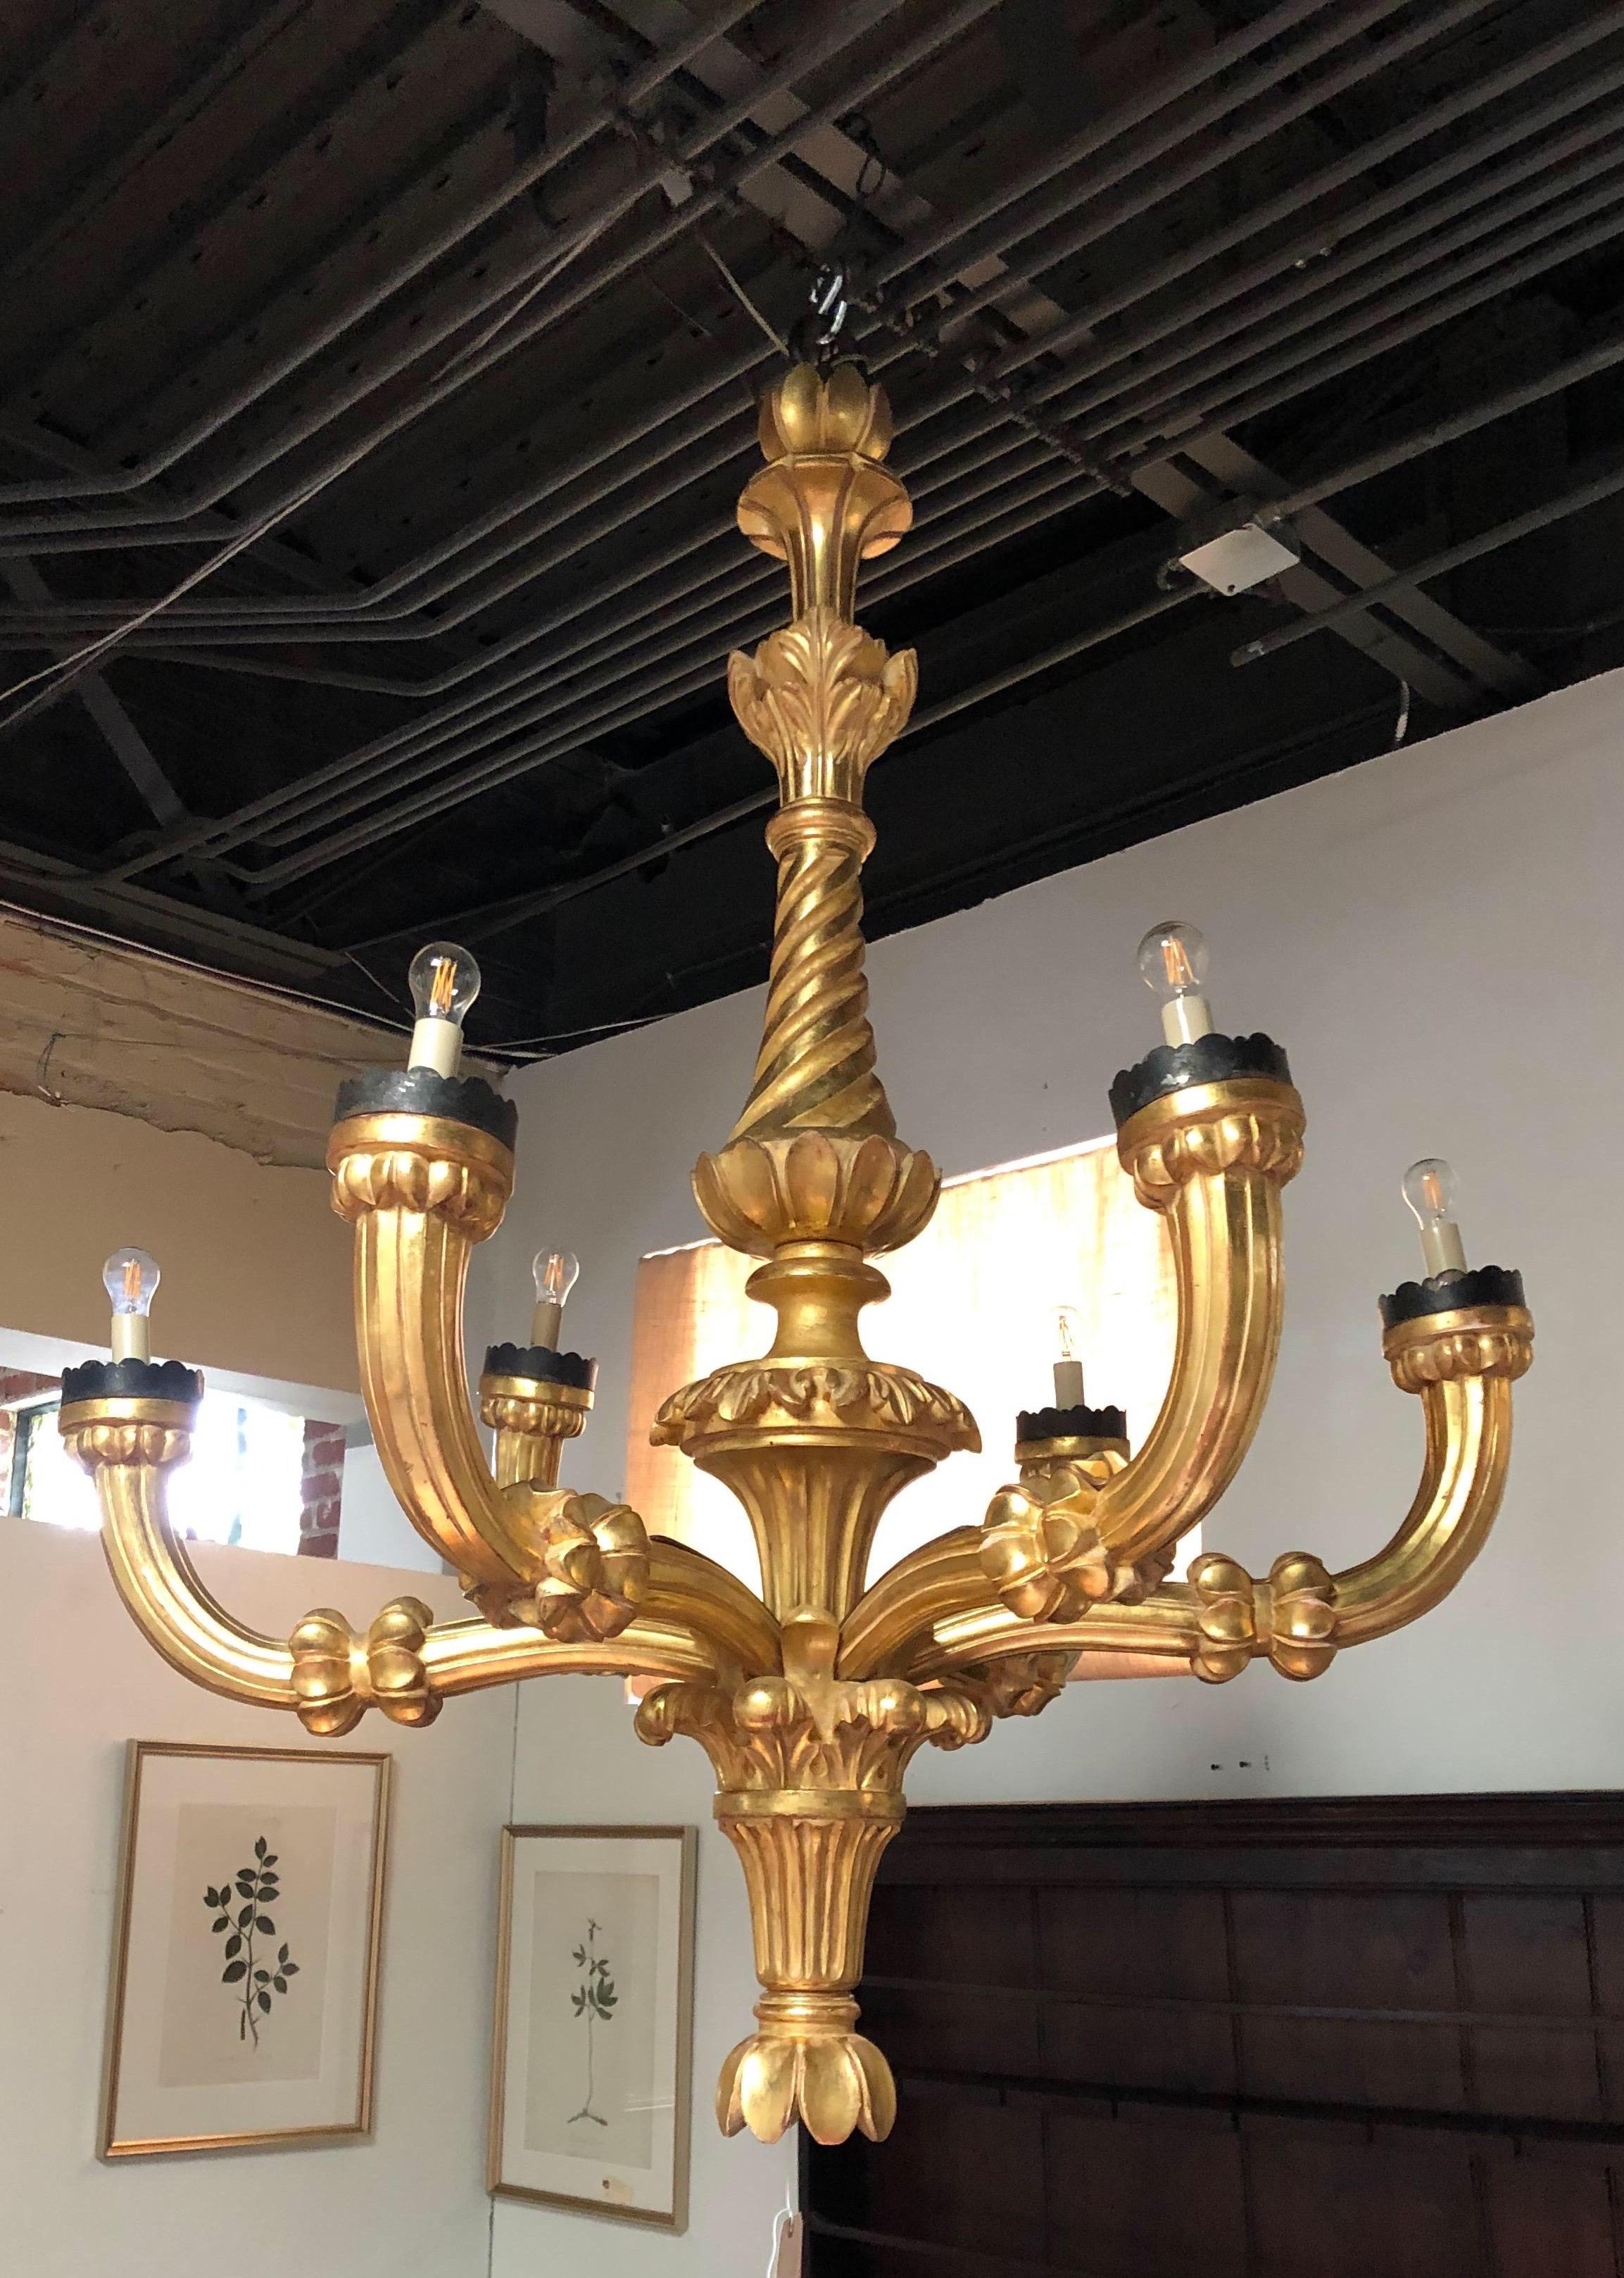 Incredible hand carved giltwood chandelier. Impressive size and details. All hand carved and water gilding. Probably, late 19th-early 20th century.